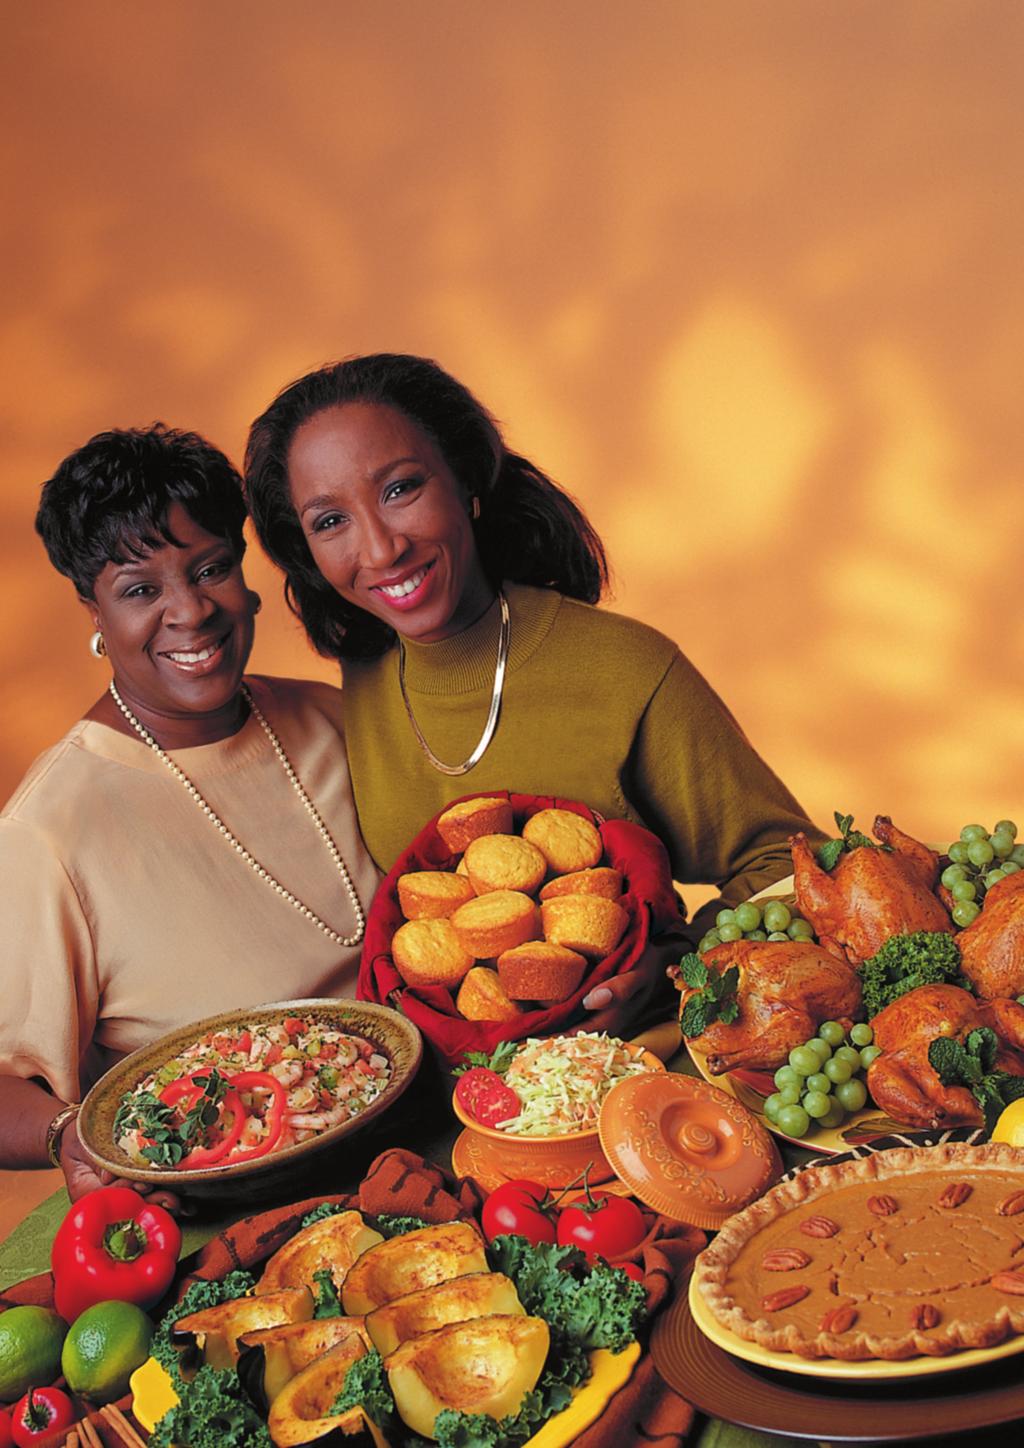 Soul Food The New Recipe Sampler for People with Diabetes Quick to Prepare Great for Weight